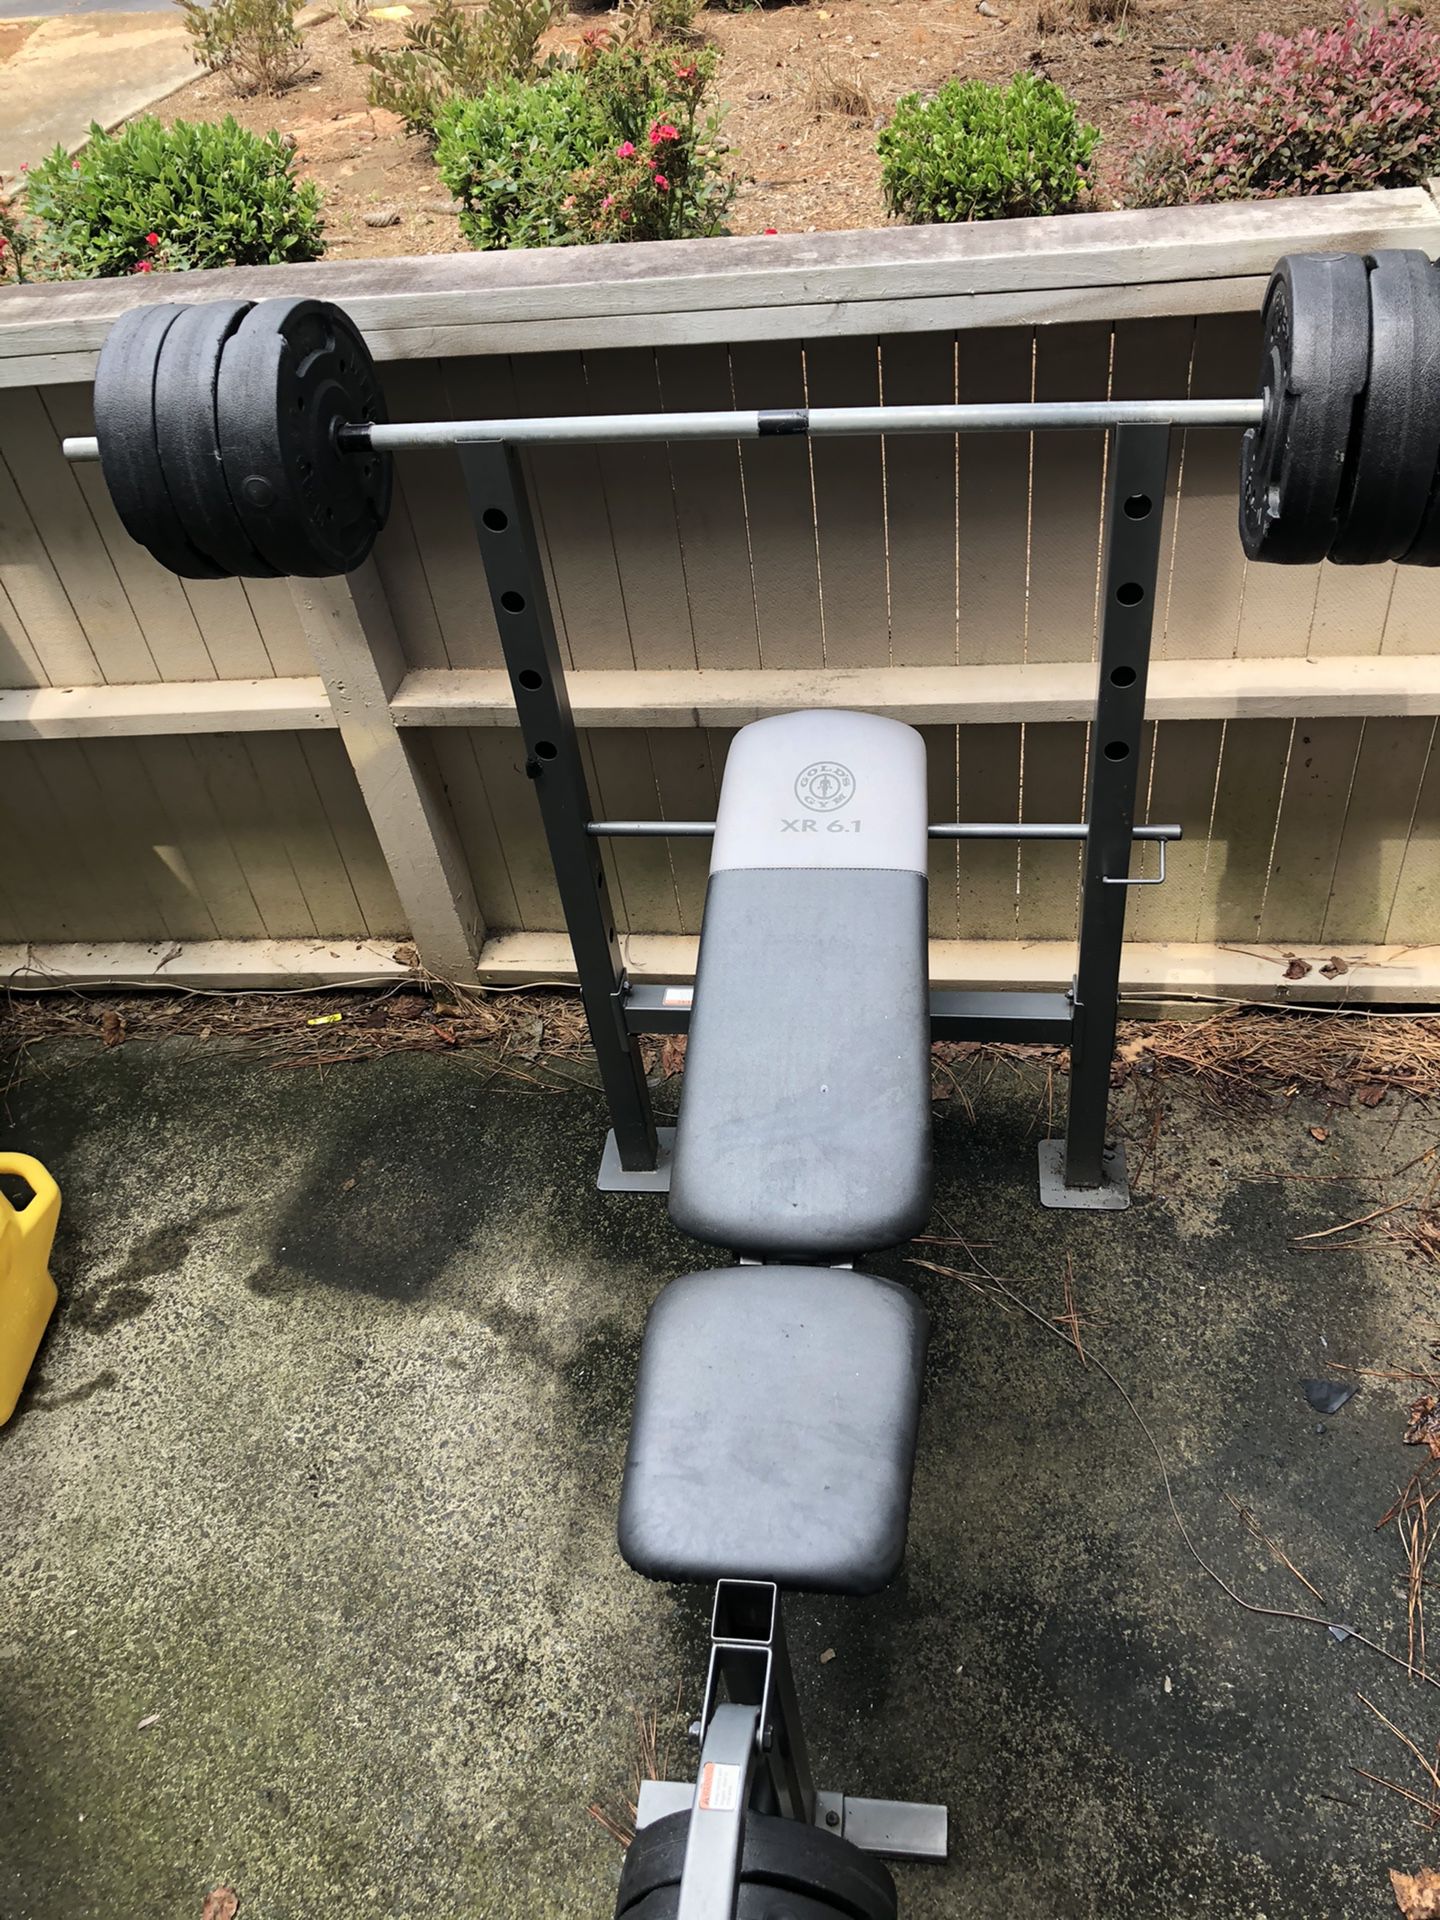 Gold's Gym XR 6.1 Weight Bench